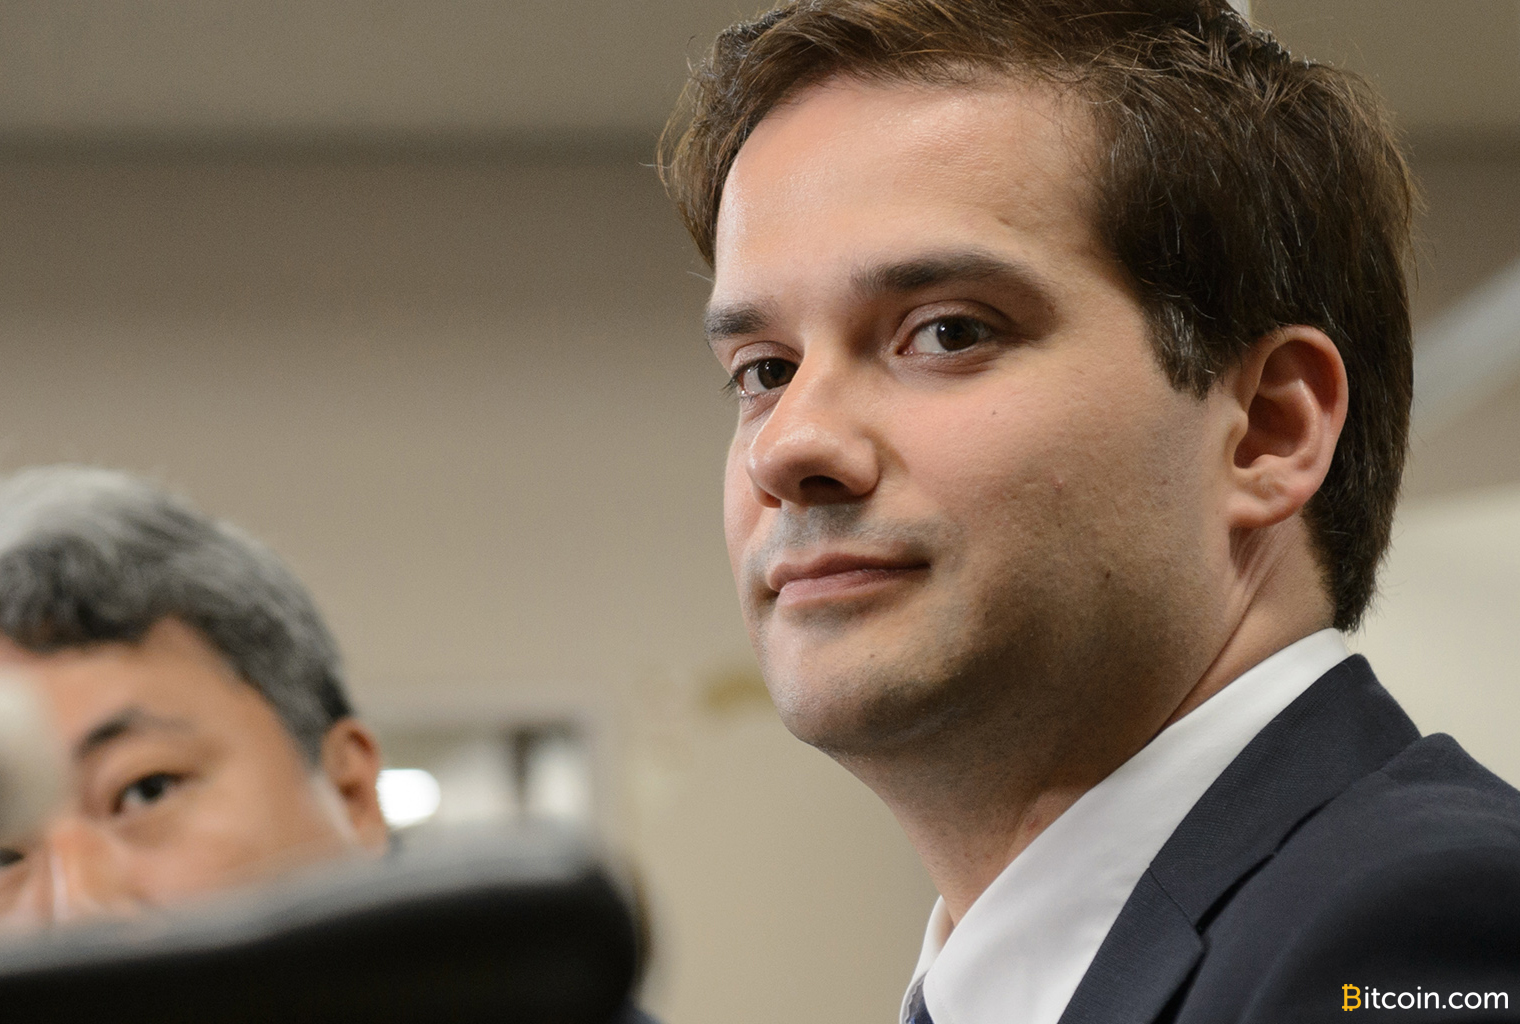 Mark Karpeles Still Faces Class Allegations in the U.S. After Japan Verdict